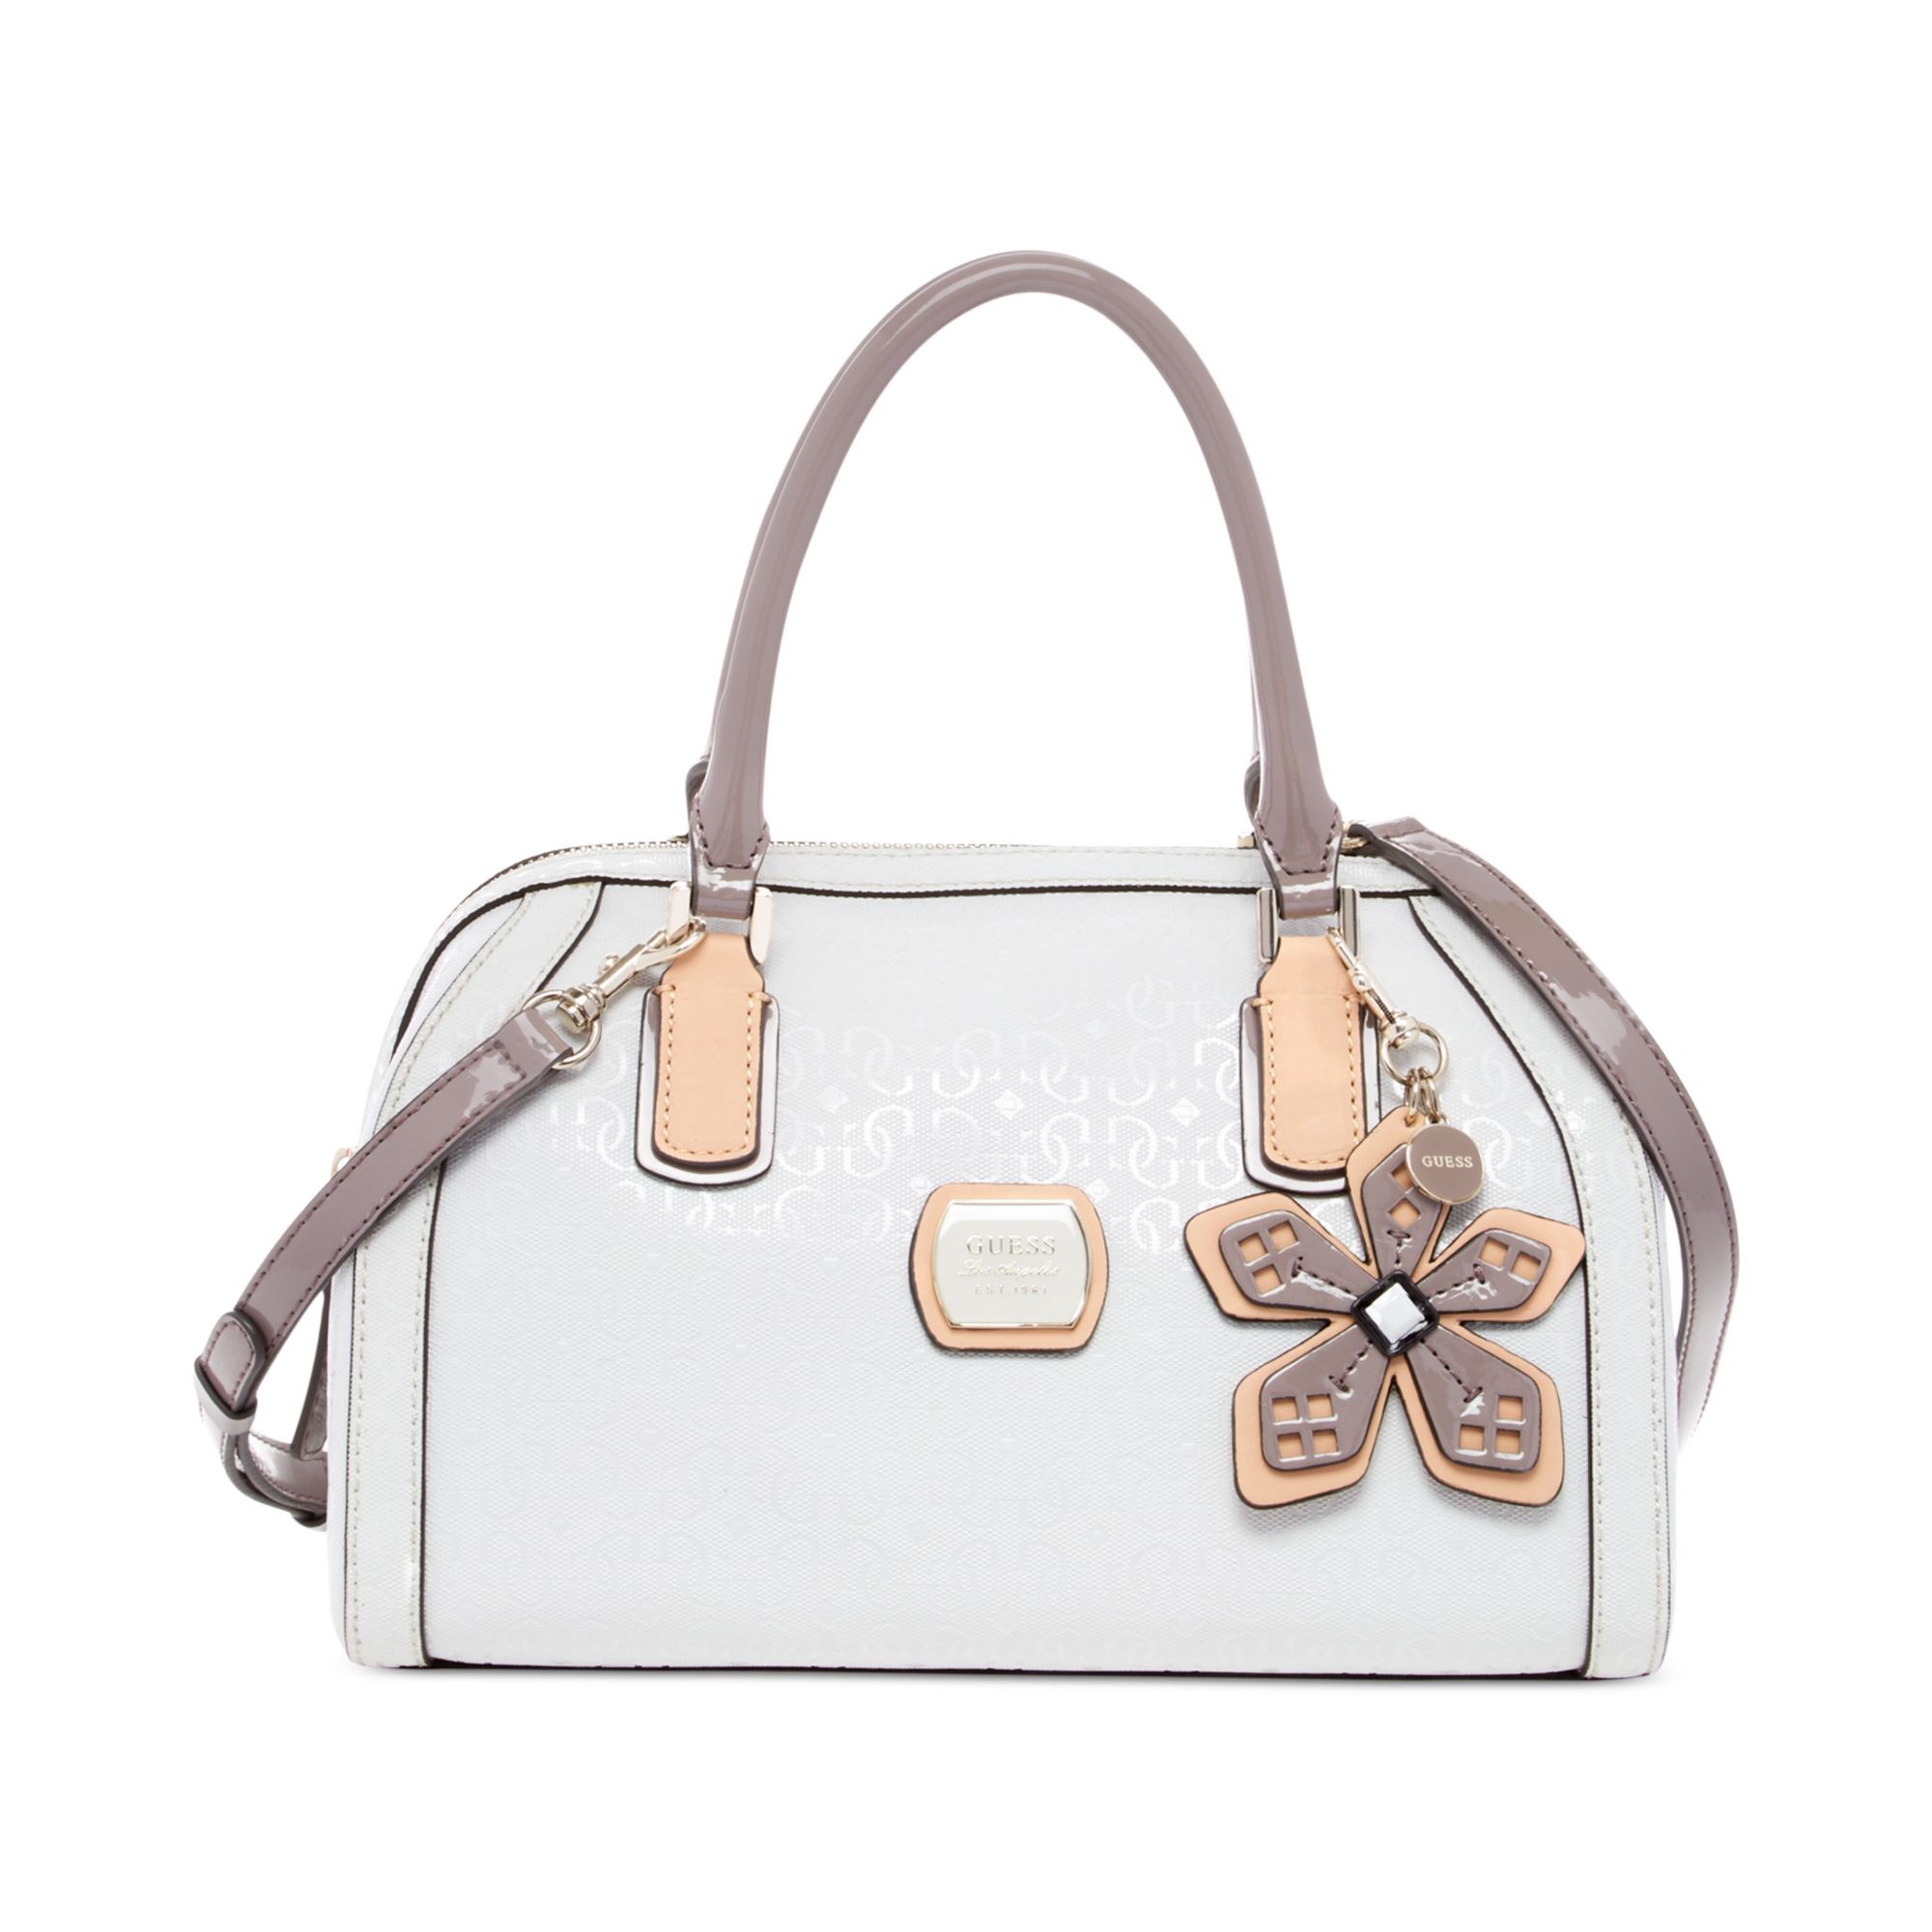 Lyst - Guess Hula Girl Box Satchel in White